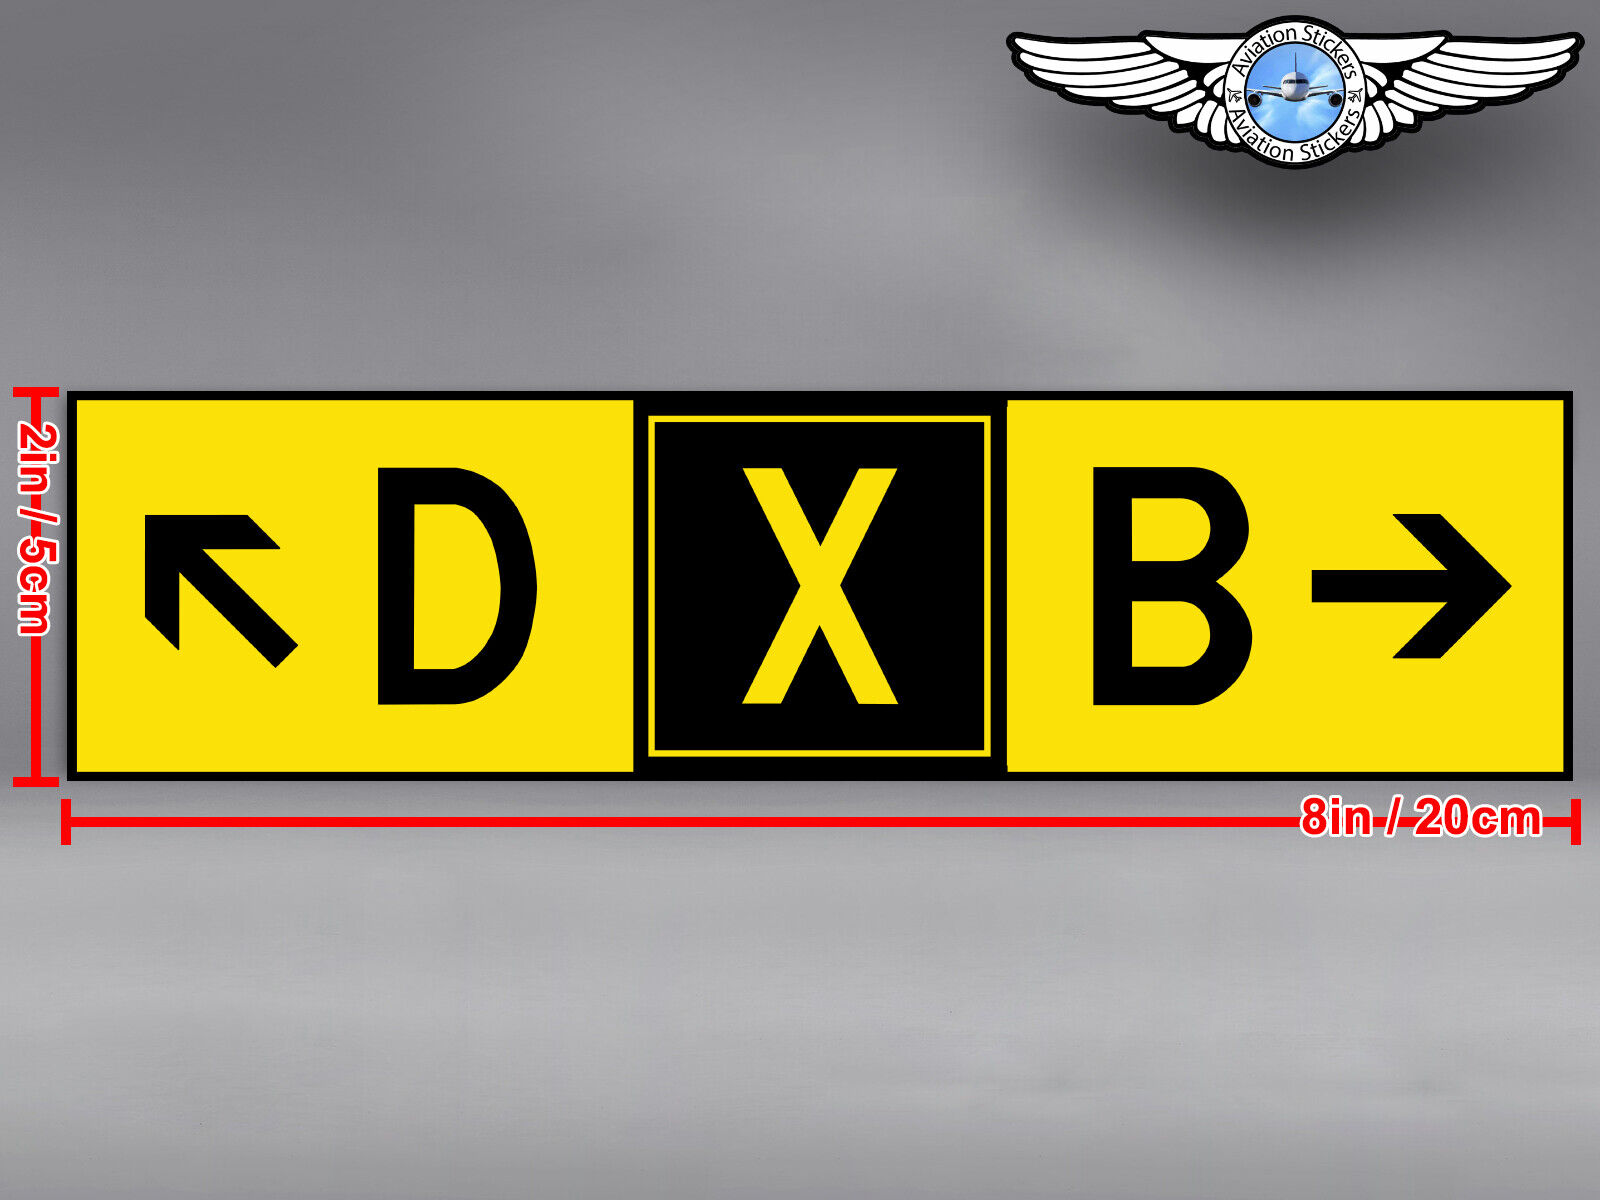 2x DXB DUBAI AIRPORT TAXIWAY SIGN DECAL STICKER